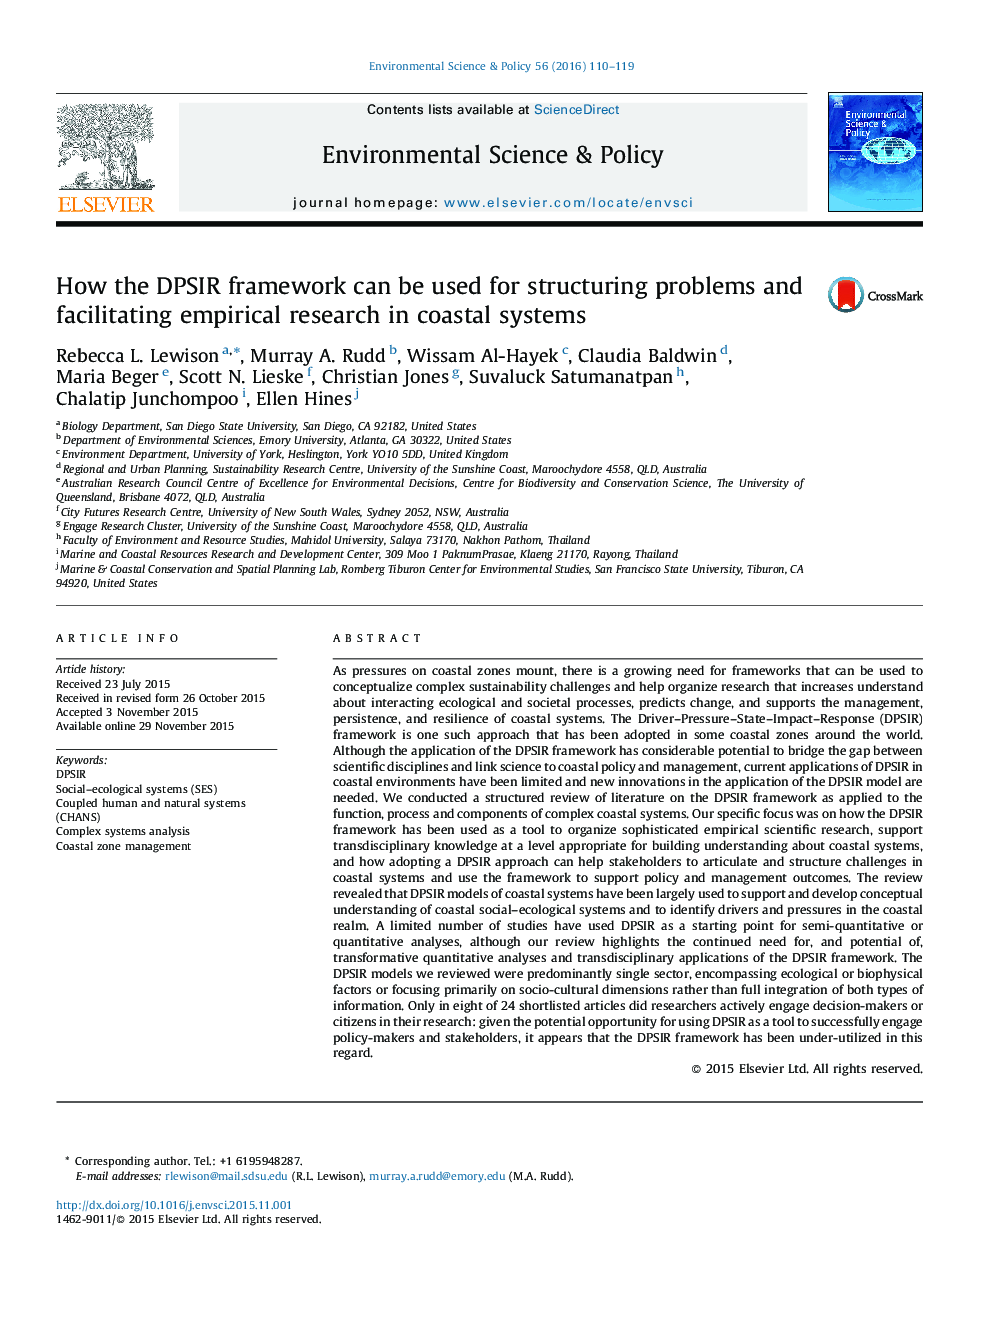 How the DPSIR framework can be used for structuring problems and facilitating empirical research in coastal systems